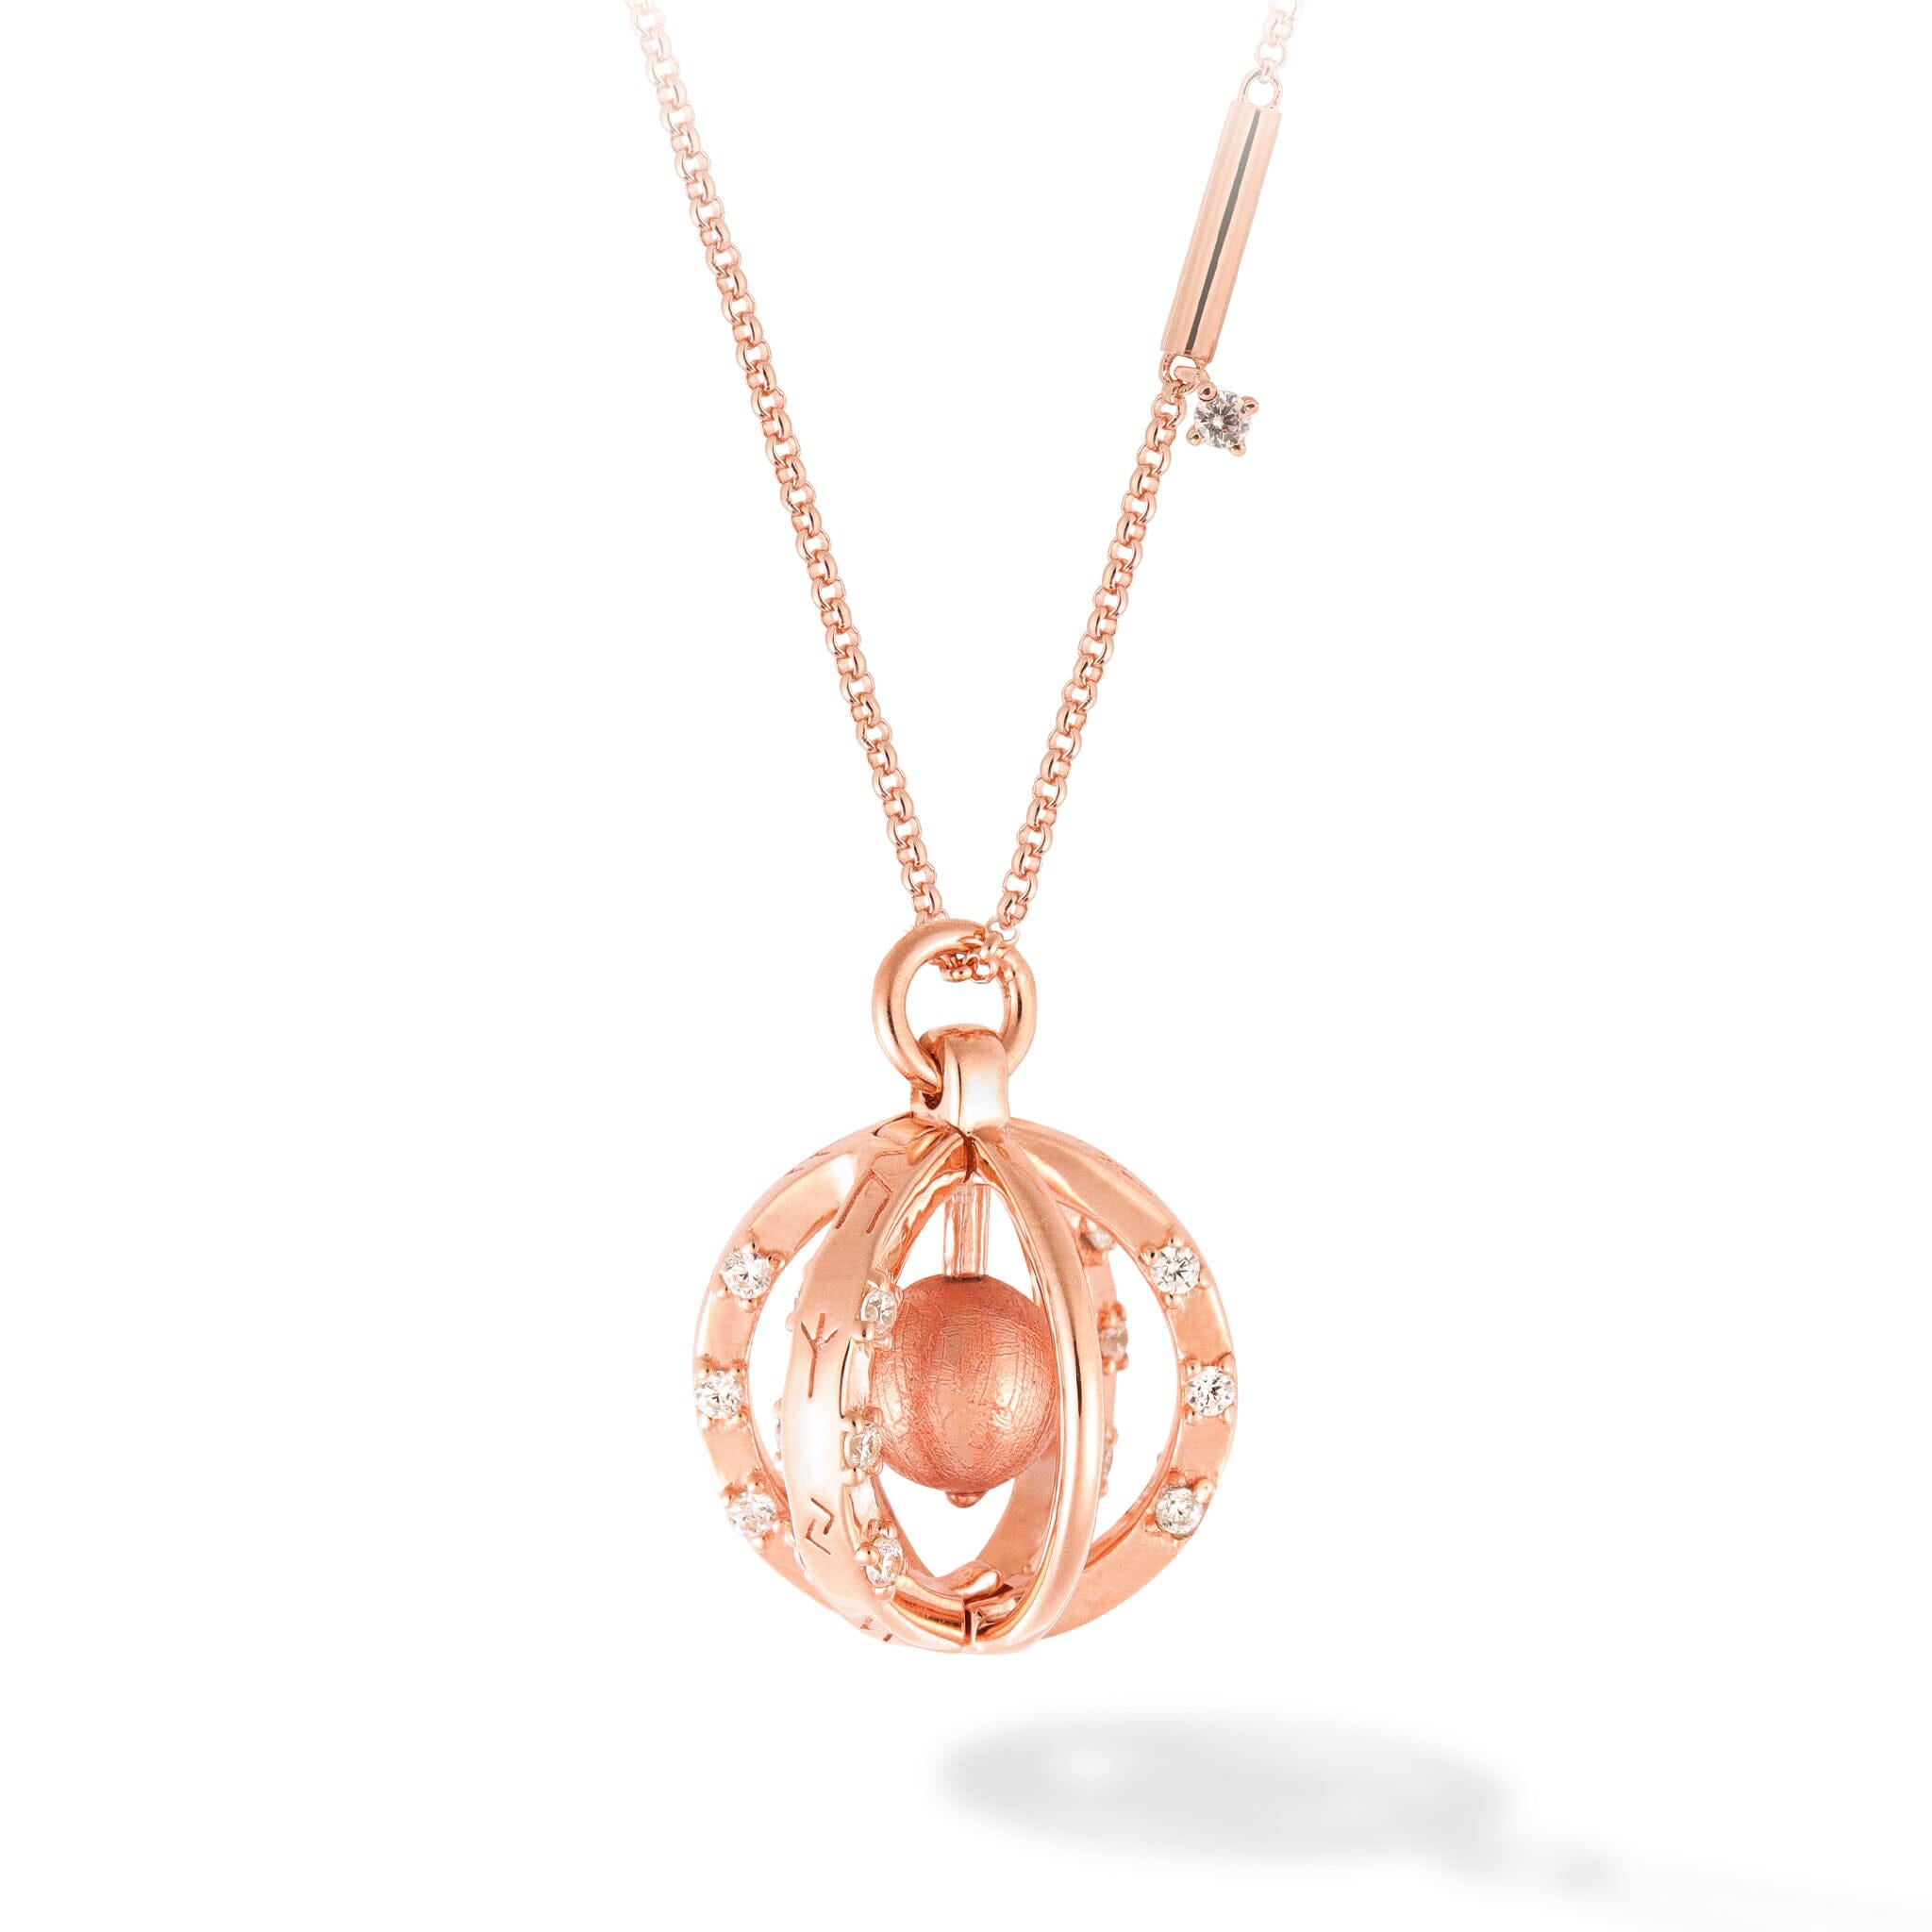 Women's Rose Gold Plated Sphere Necklace Locket with Meteorite Necklaces WAA FASHION GROUP 68cm 